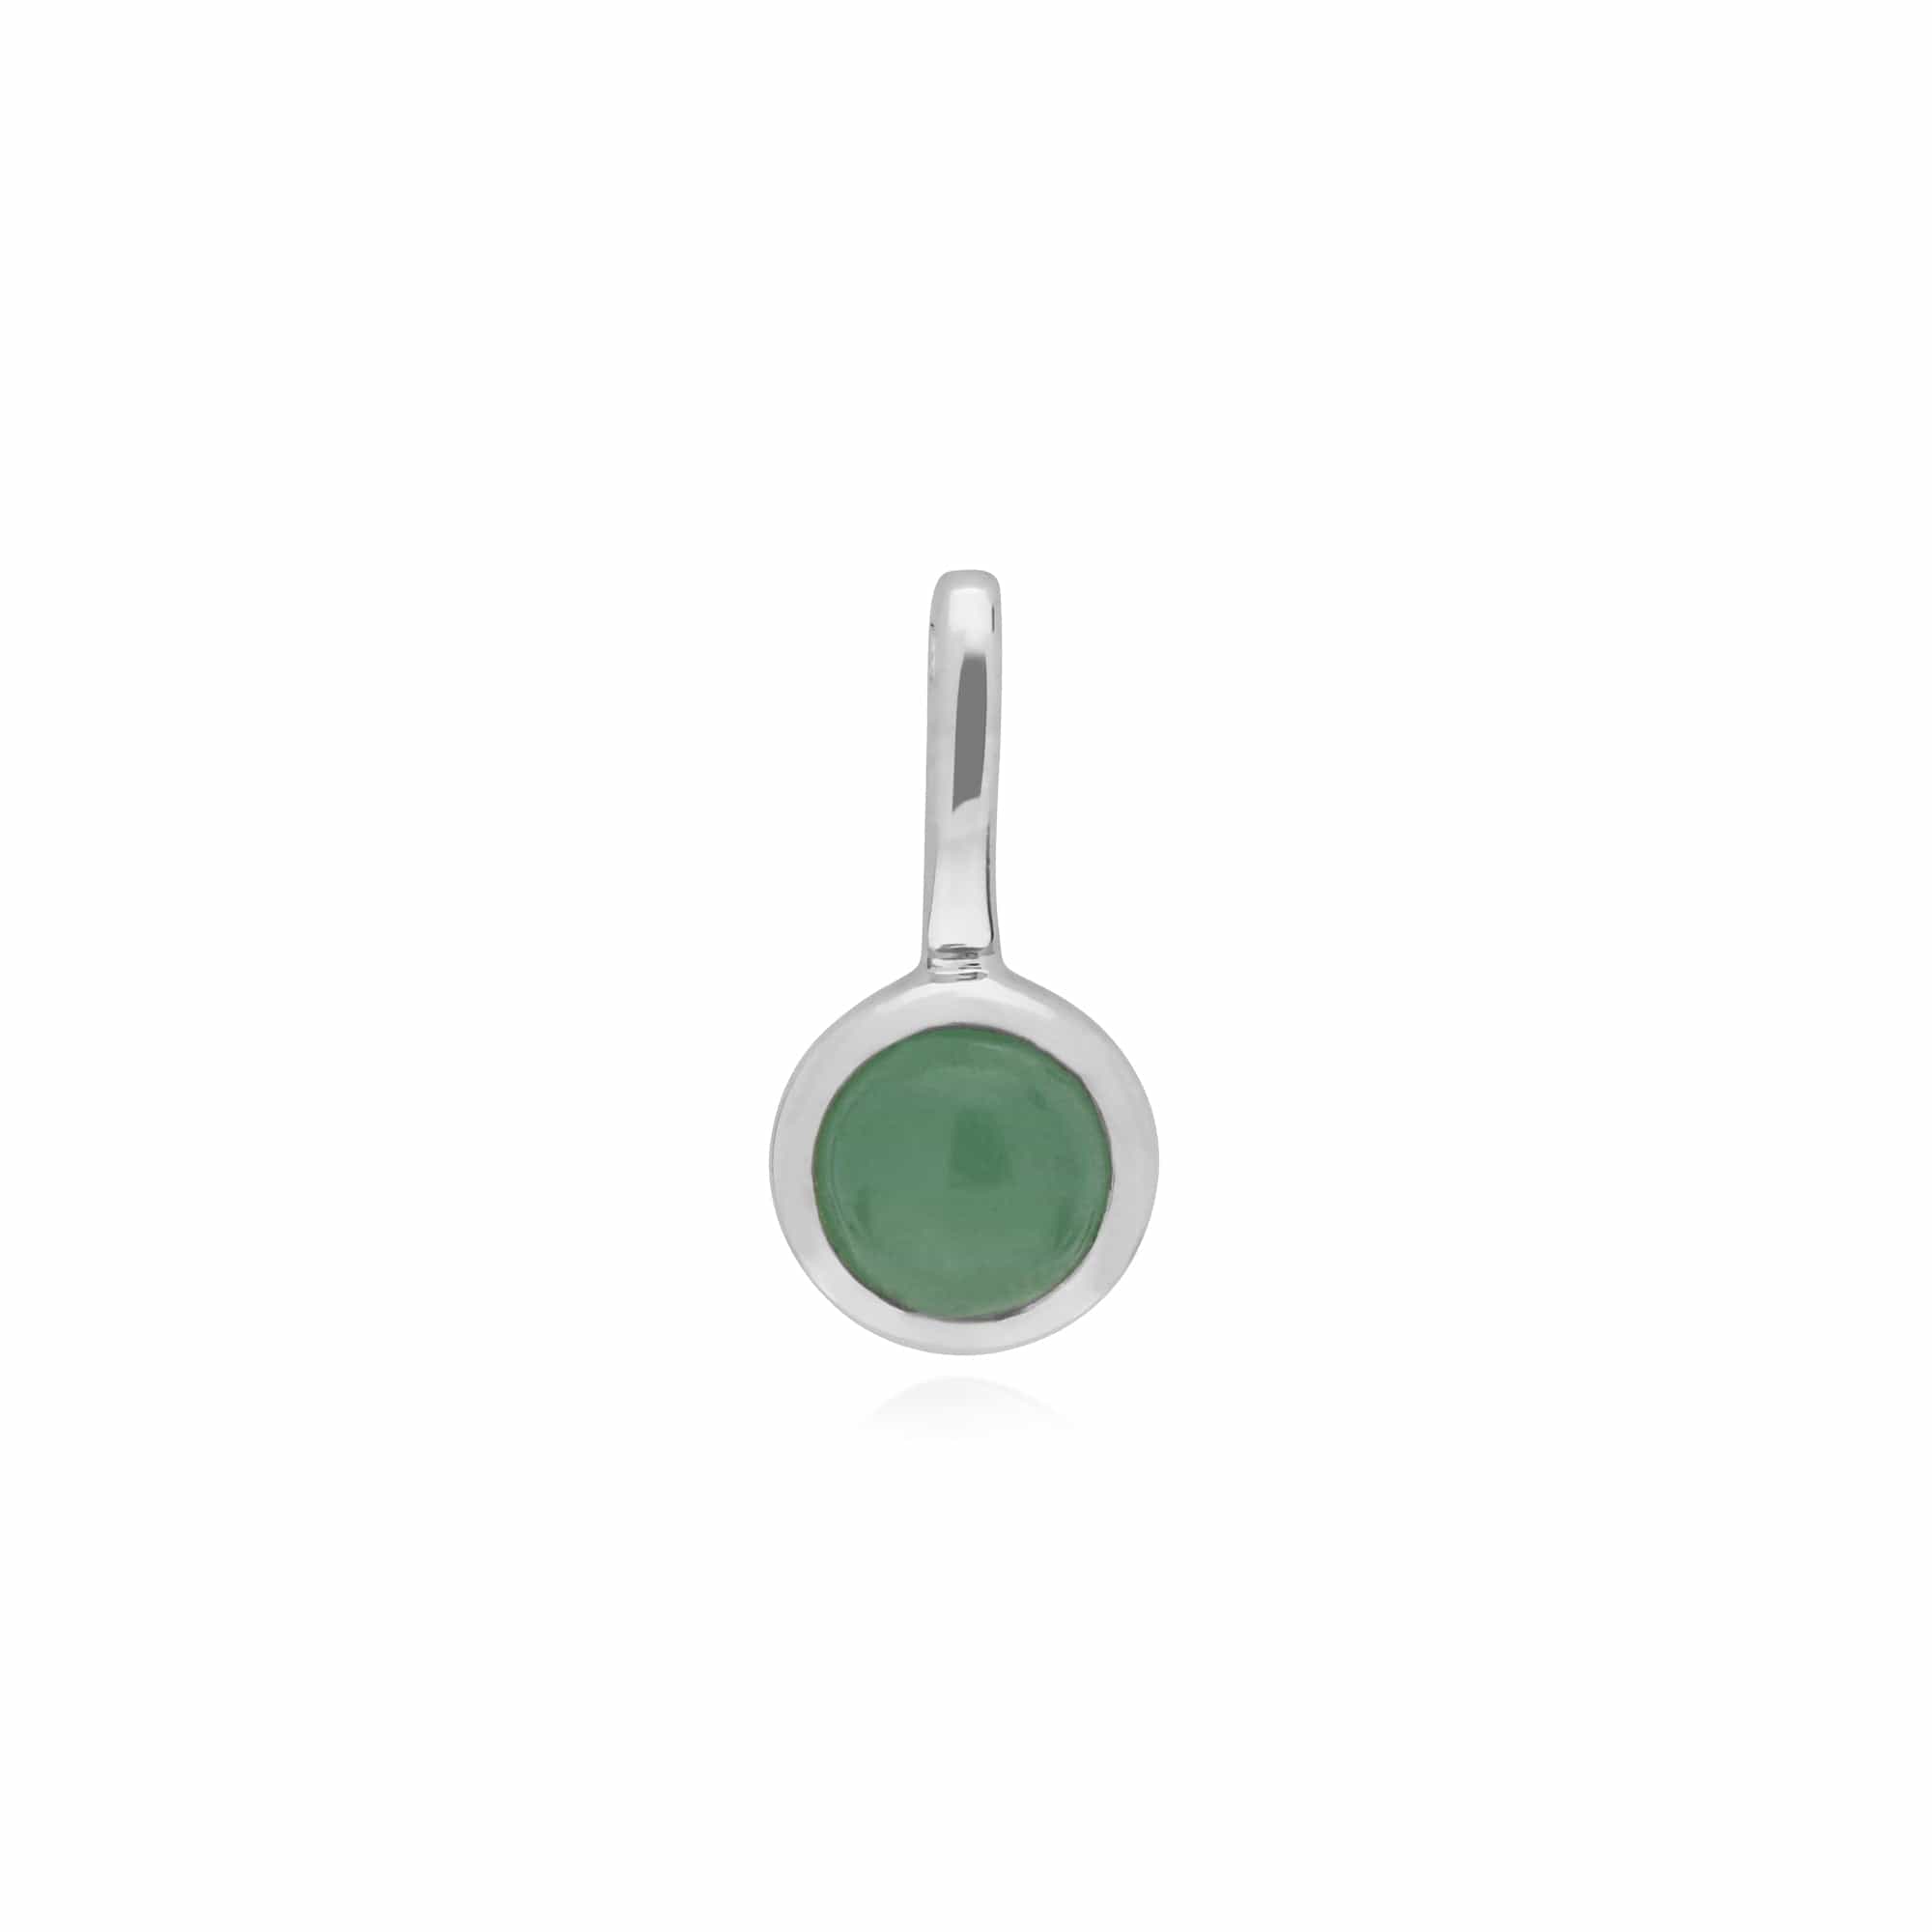 270P028403925-270P027001925 Classic Heart Lock Pendant & Jade Charm in 925 Sterling Silver 2